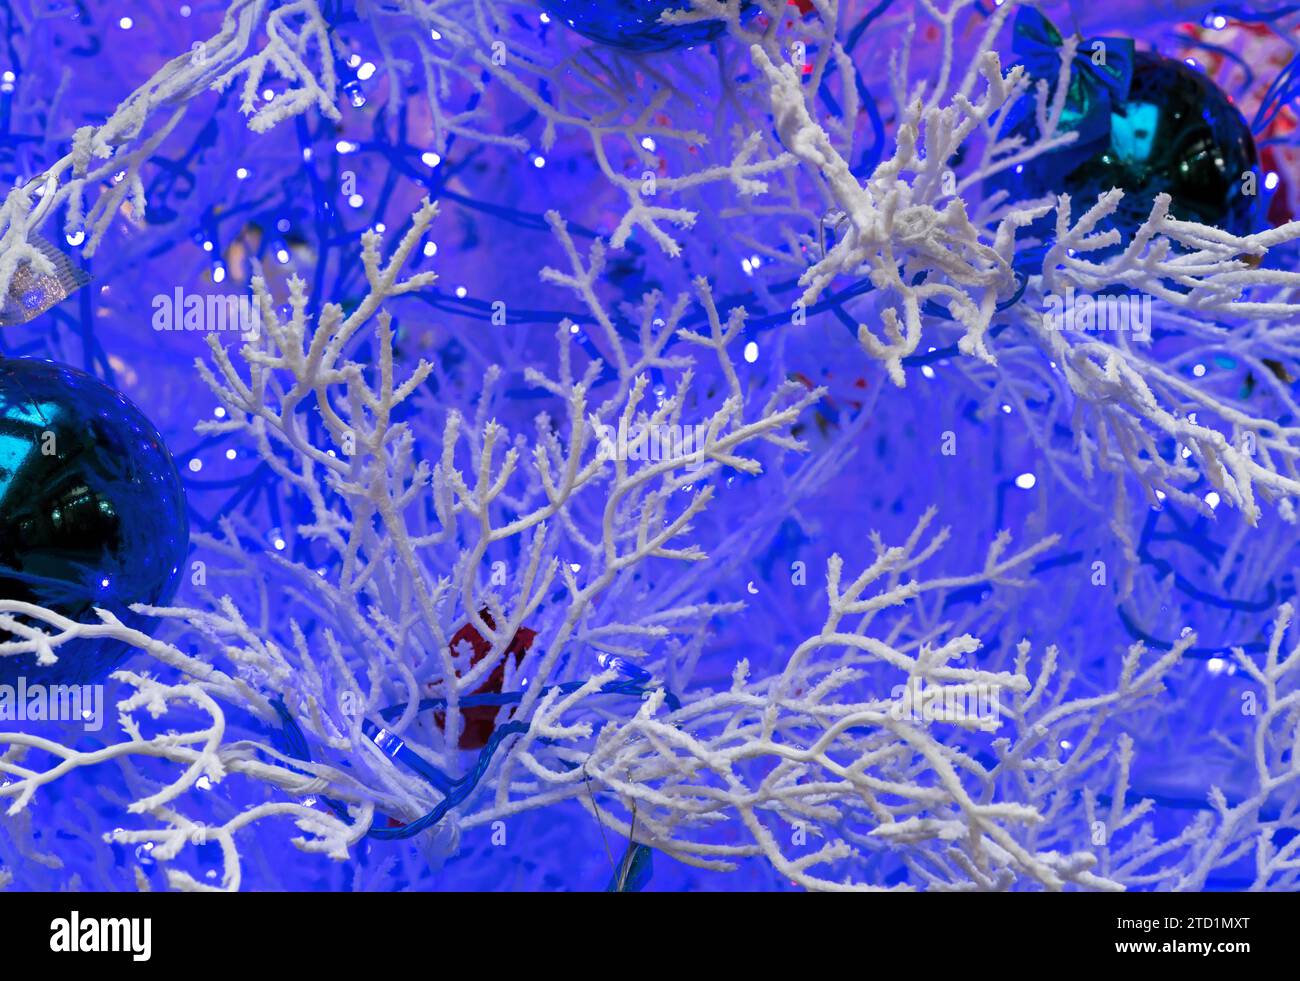 Christmas background with snow-covered branches and blue garland. Stock Photo